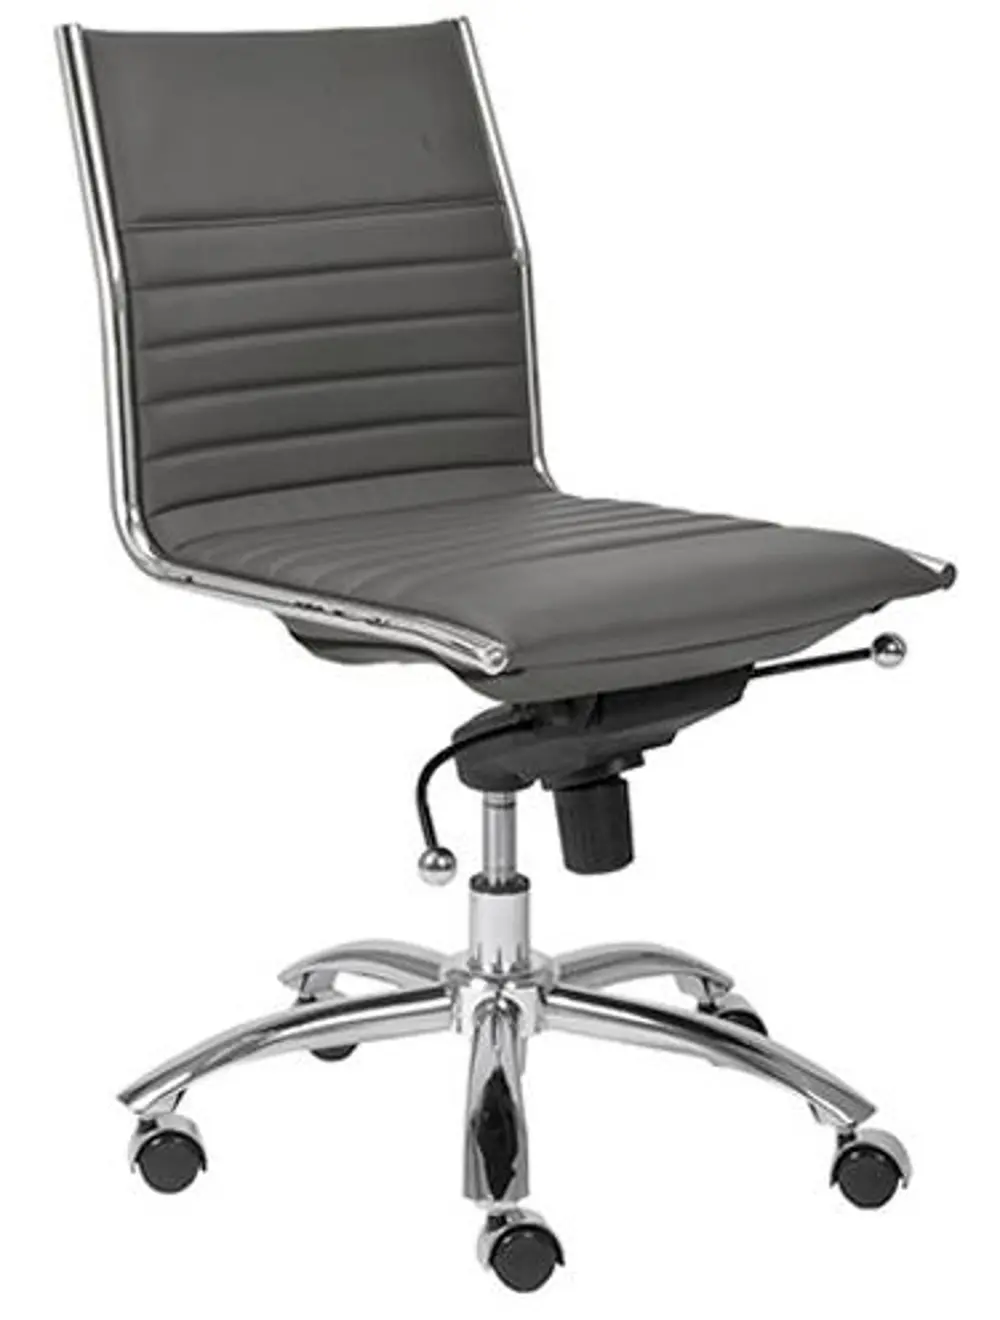 Gray Low-Back Office Chair - Dirk-1